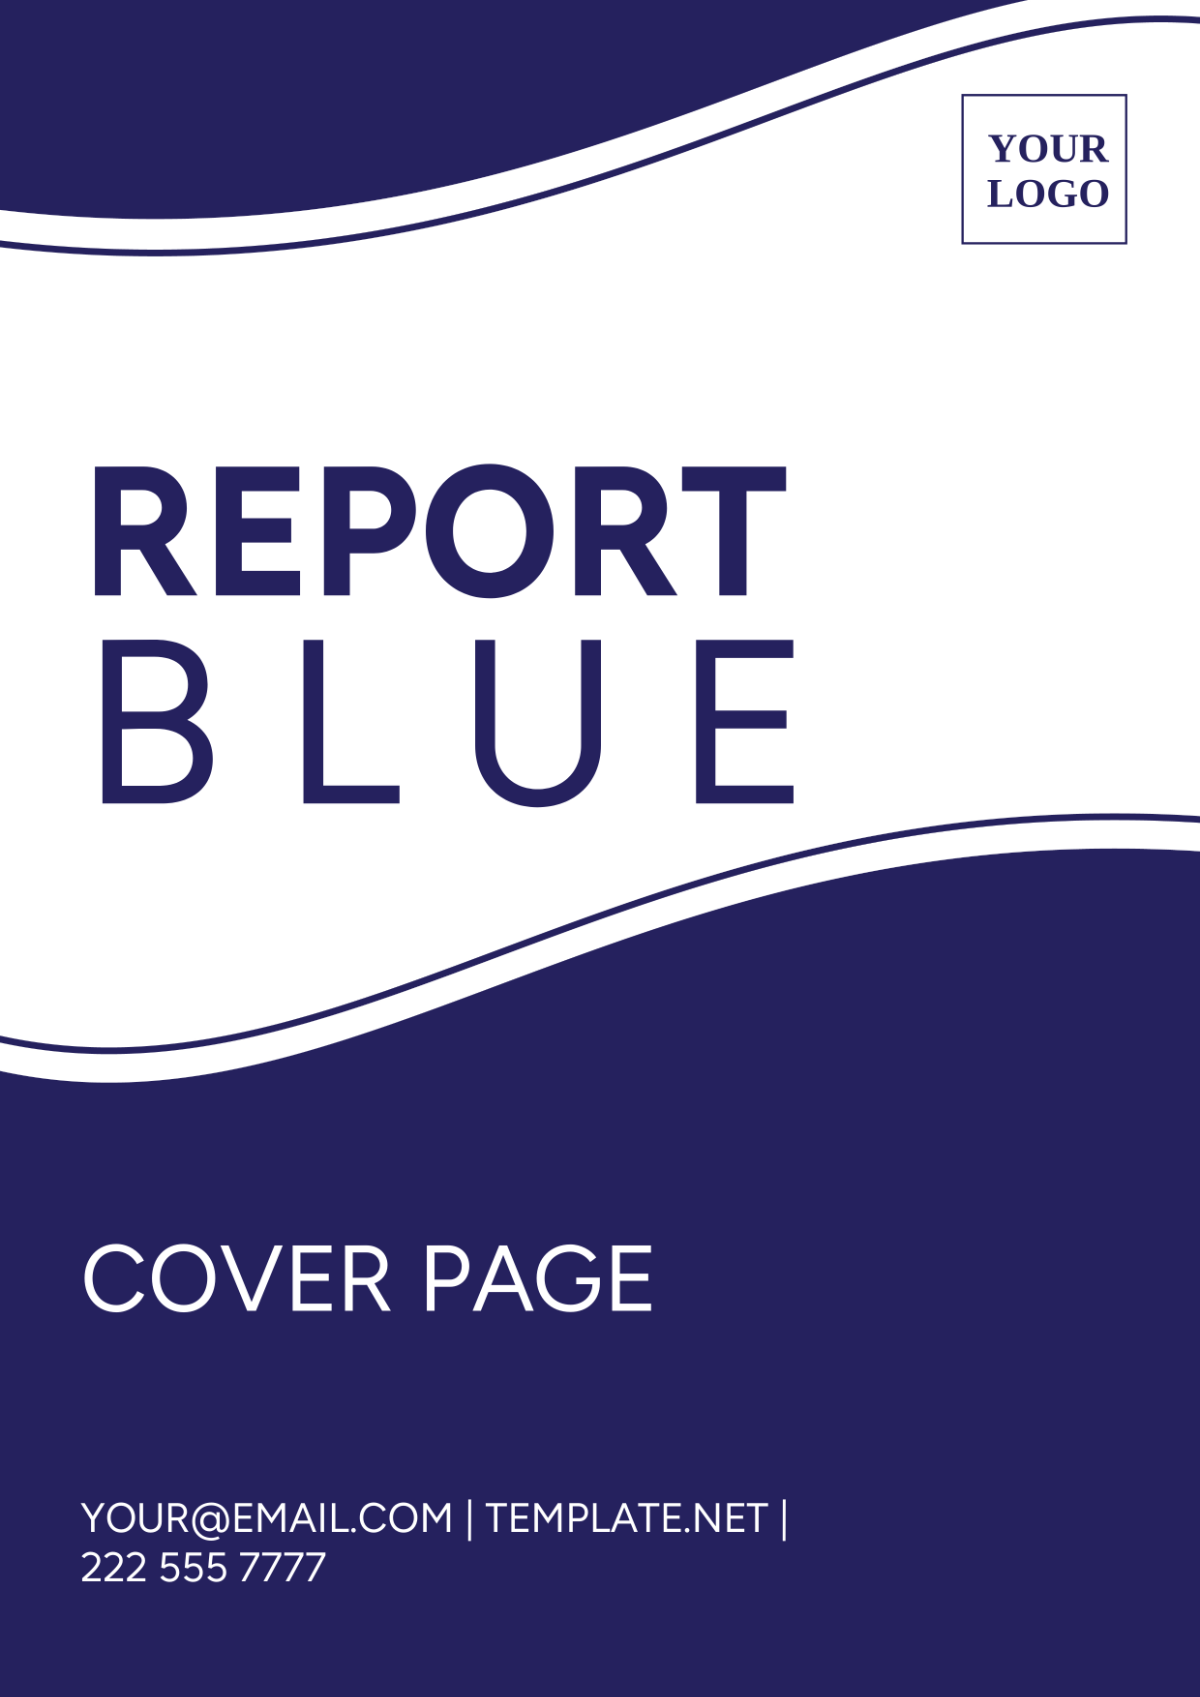 Report Blue Cover Page Template